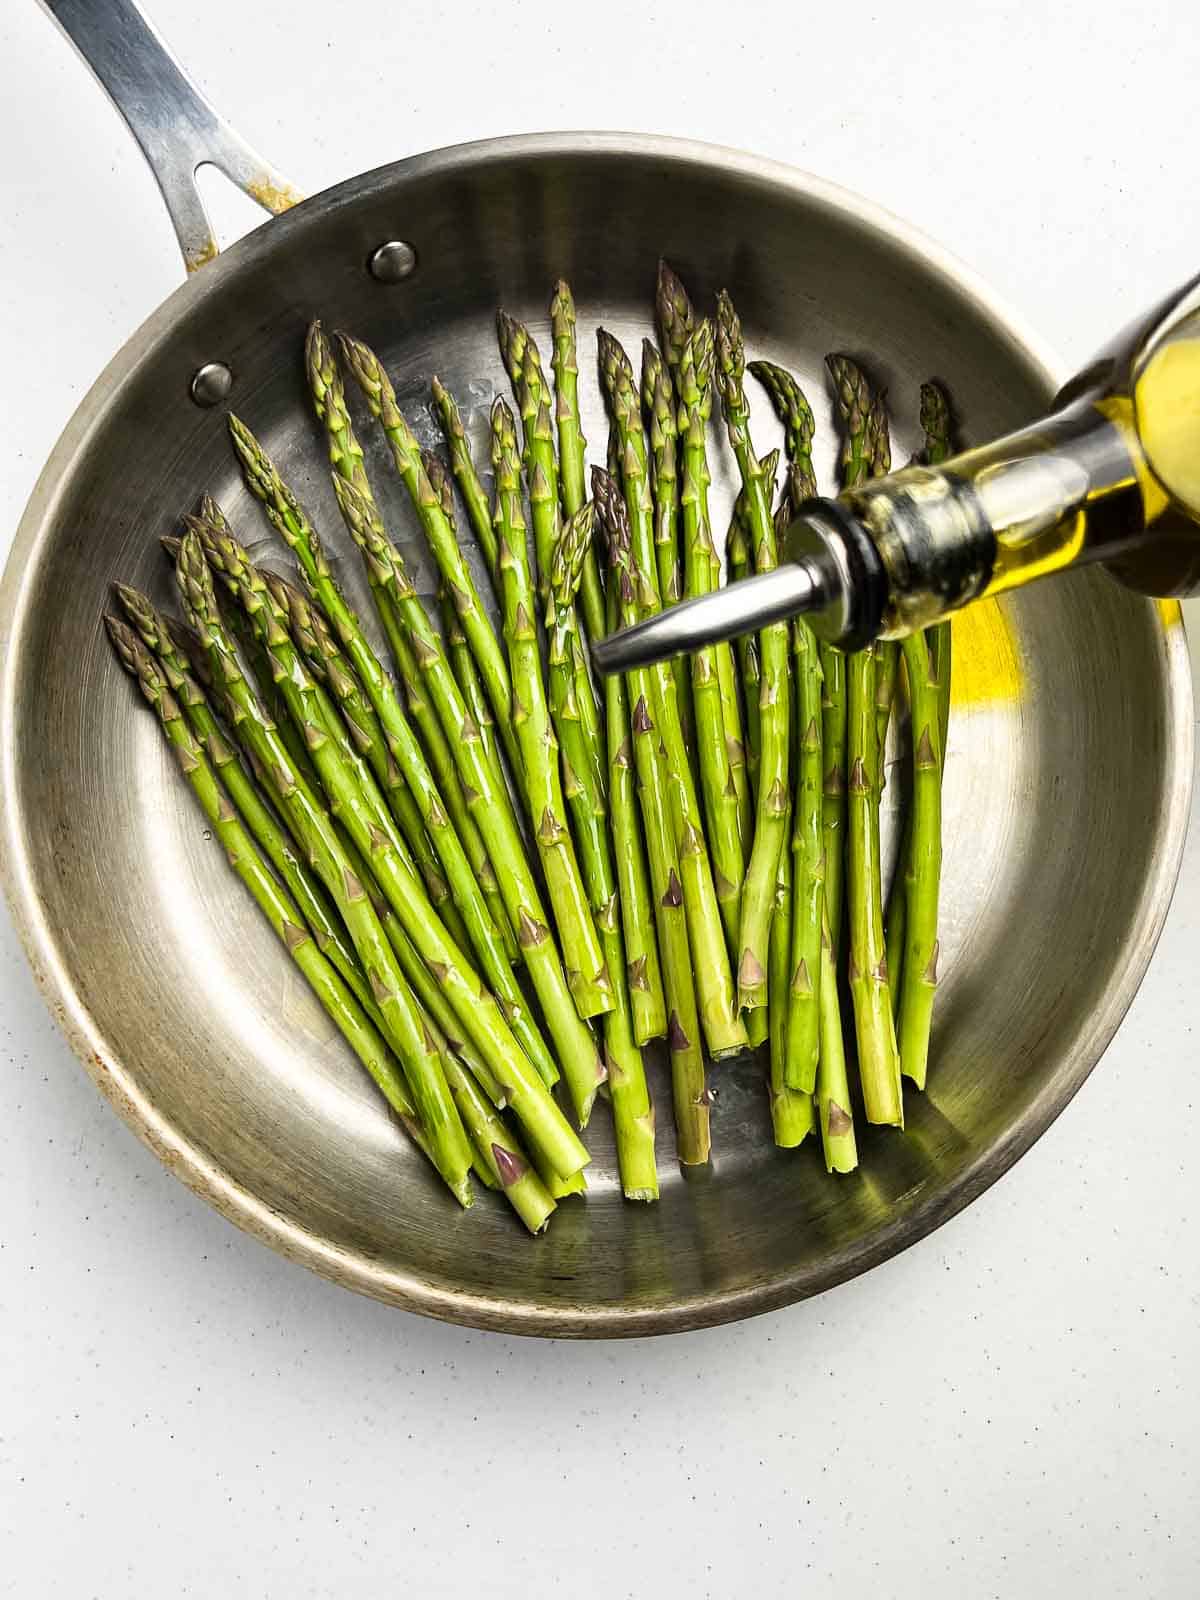 Asparagus spears in a skillet with olive ol.